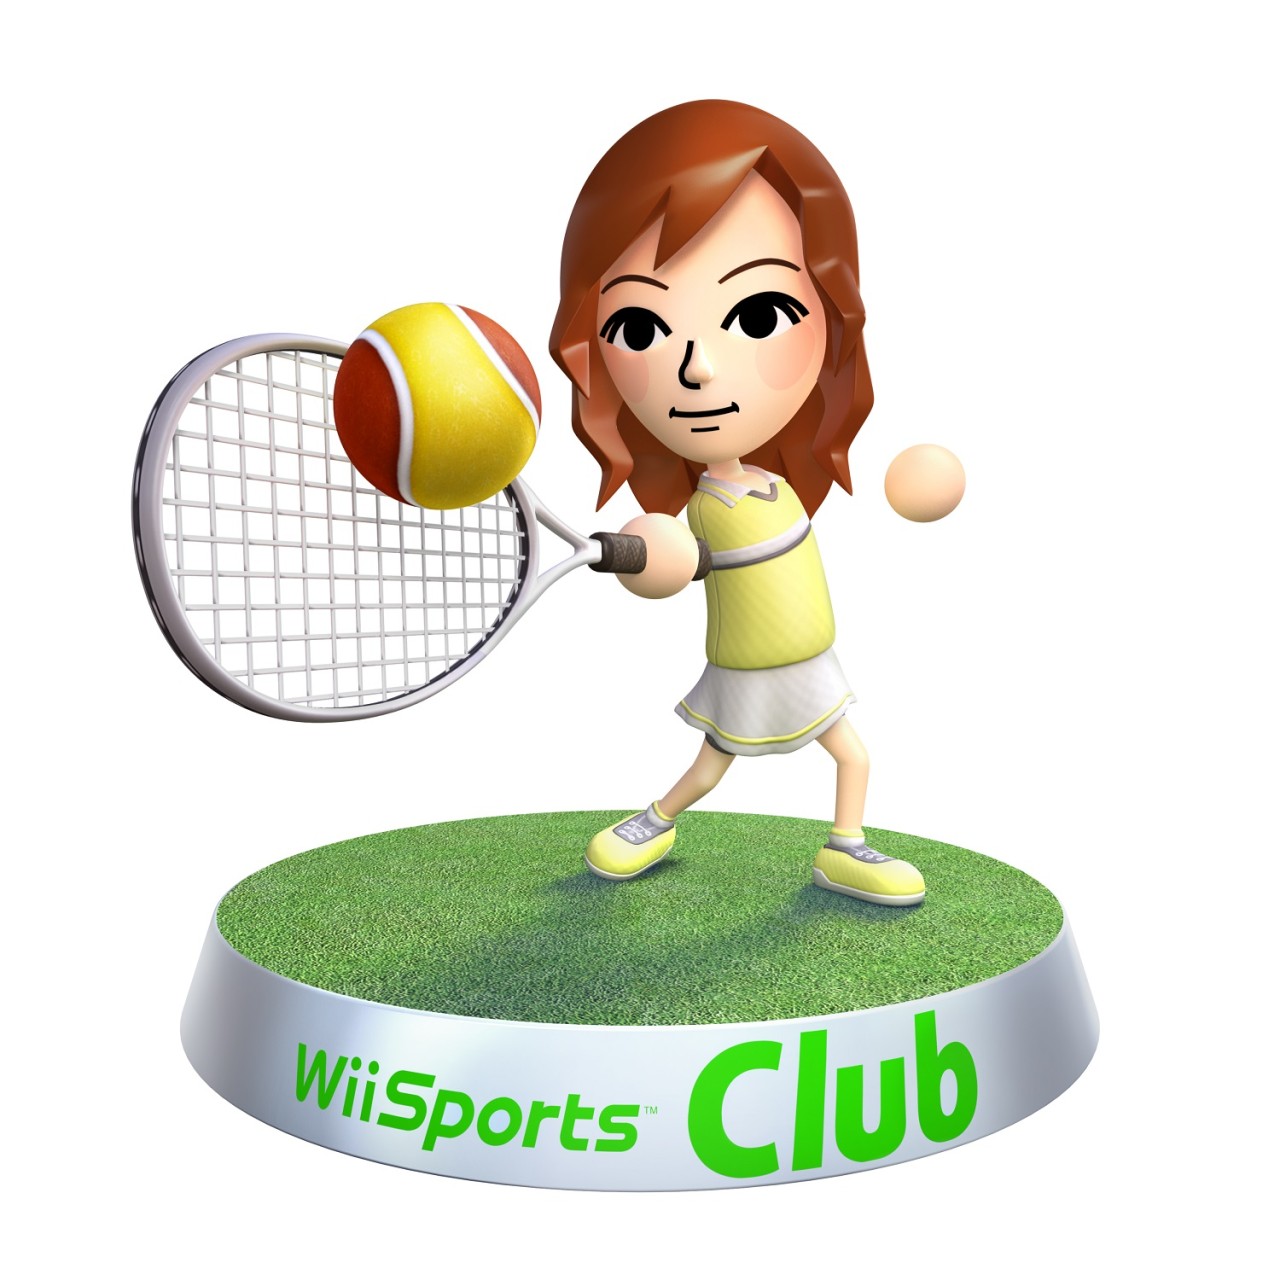 wii sports cheats for tennis